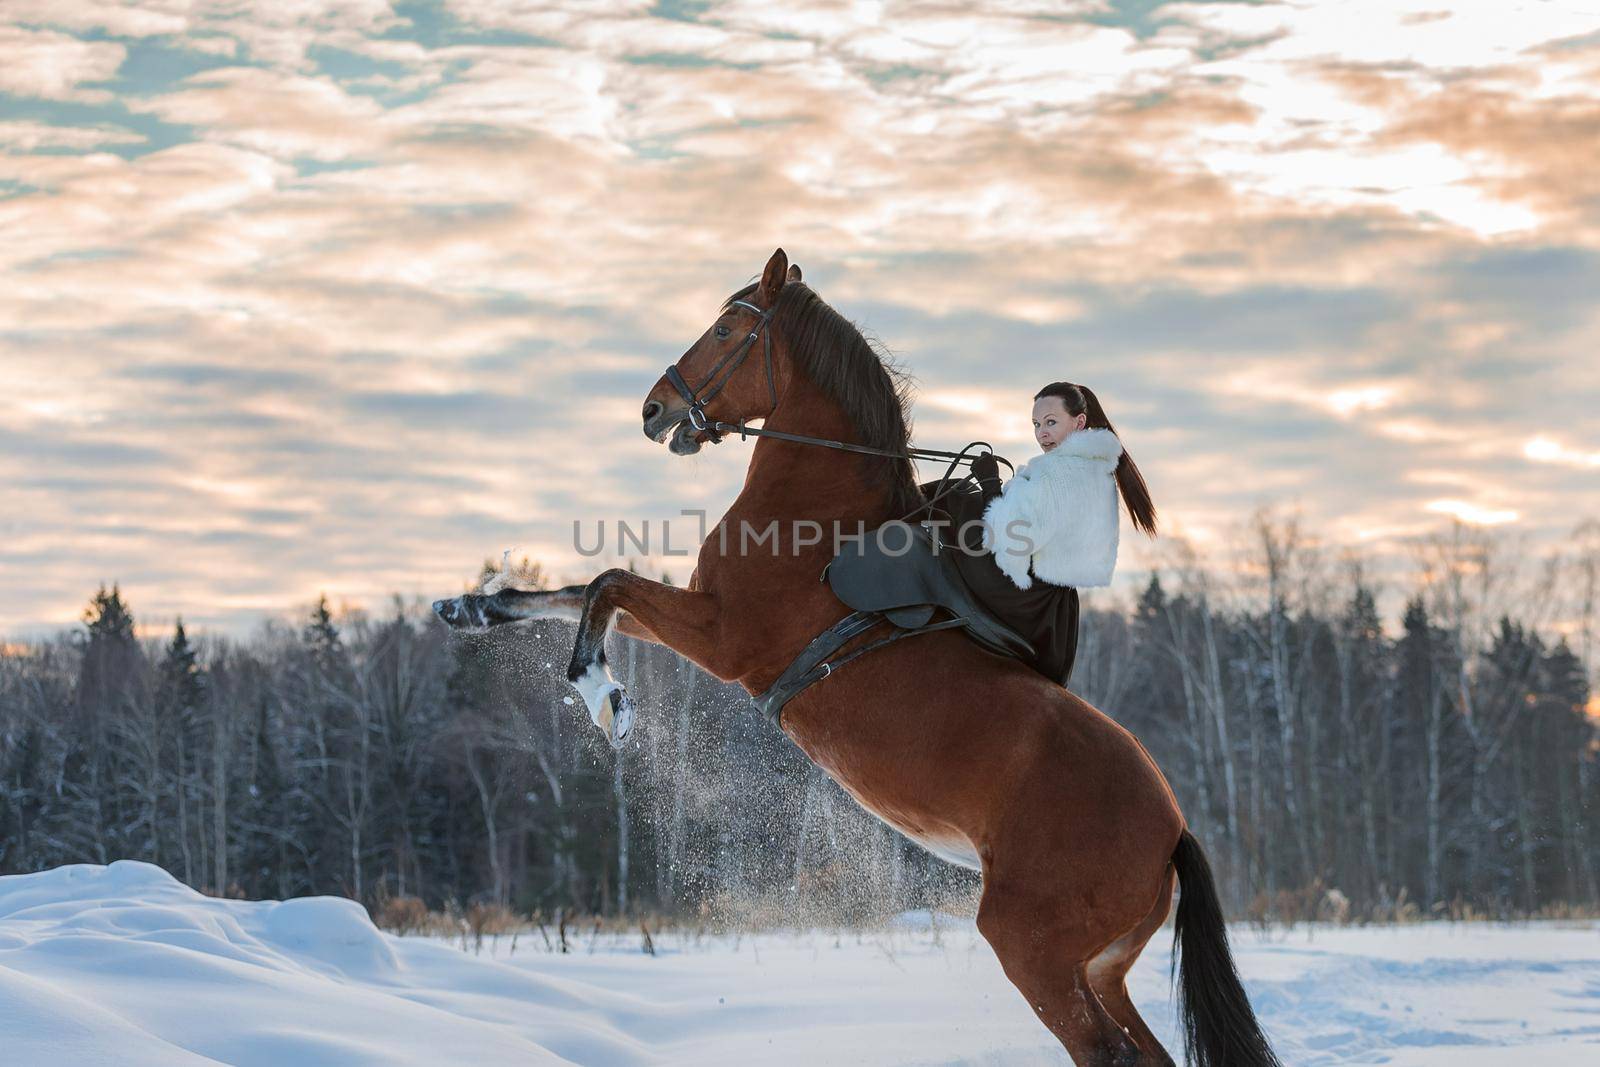 A girl in a white cloak rides a brown horse in winter. Golden hour, setting sun. The horse rears up.